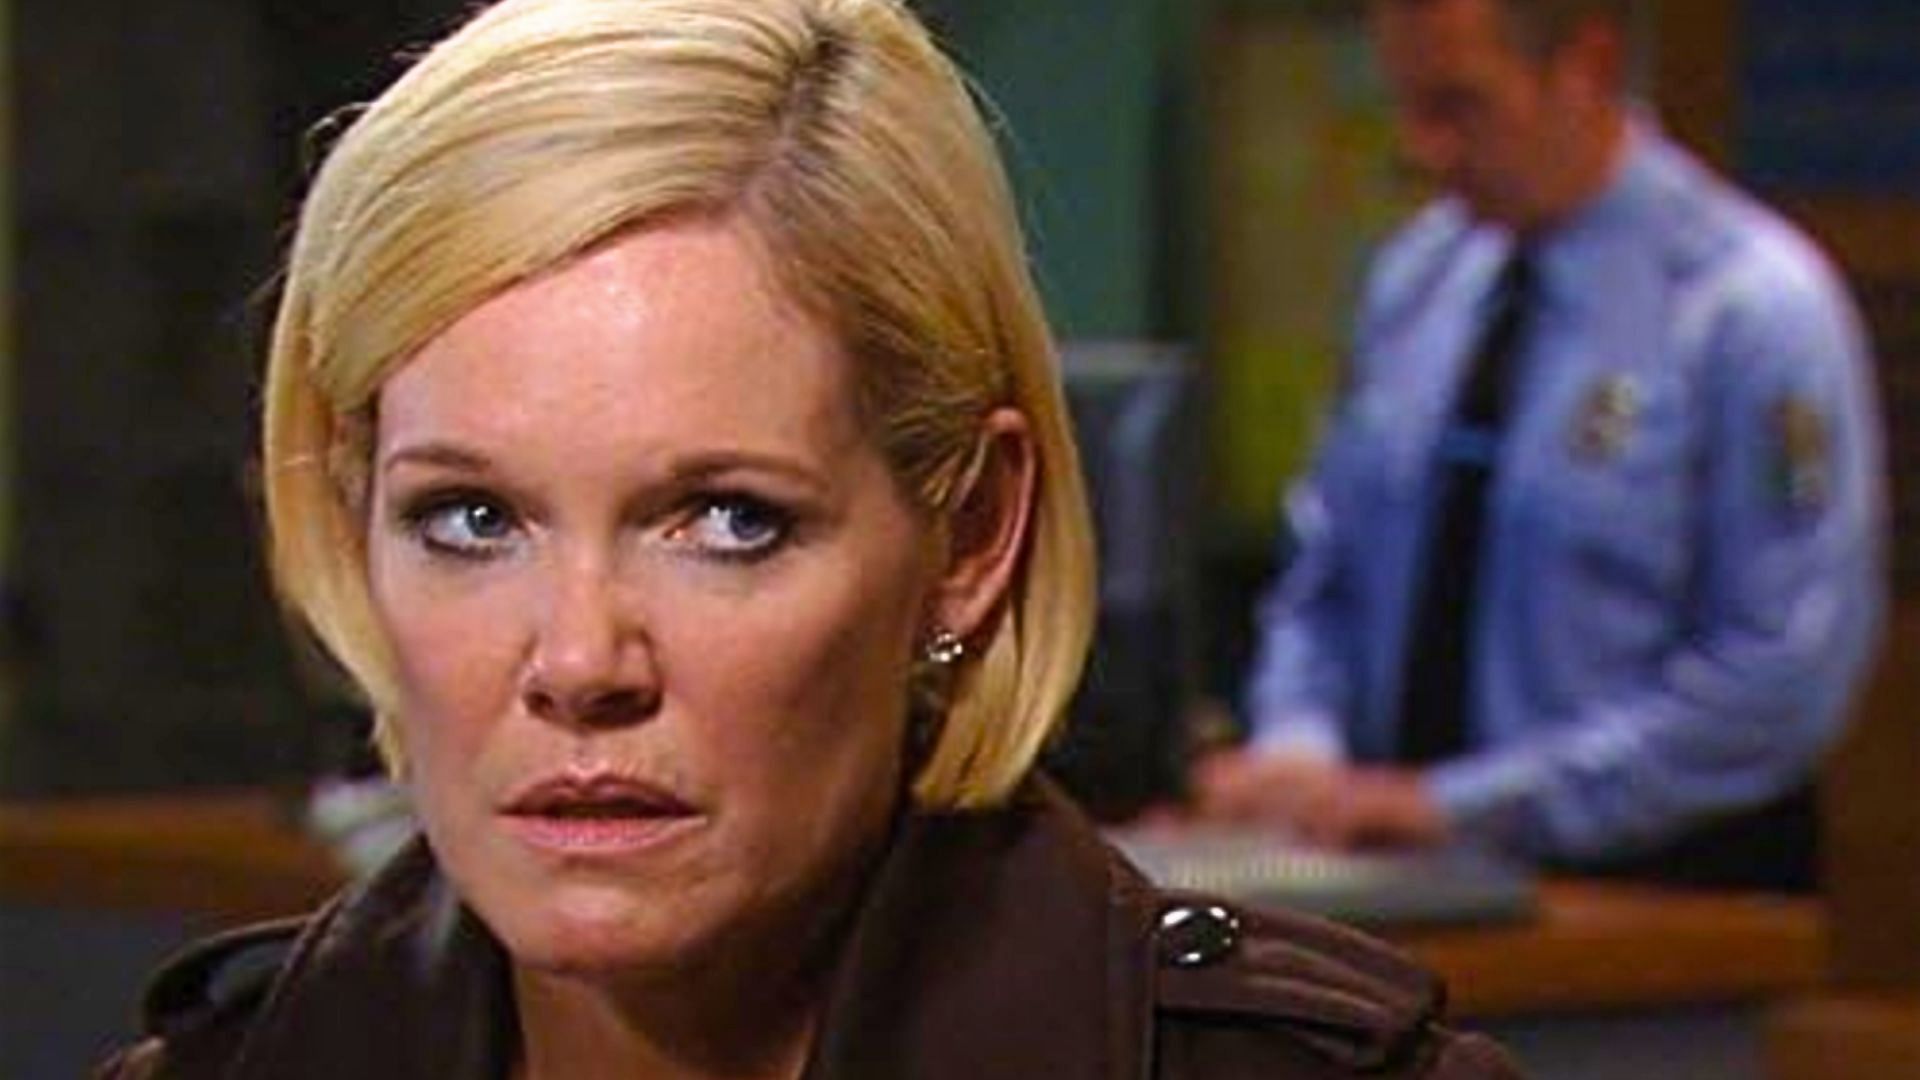 Ava is a character on General Hospital, portrayed by actress Maura West (Image via ABC)